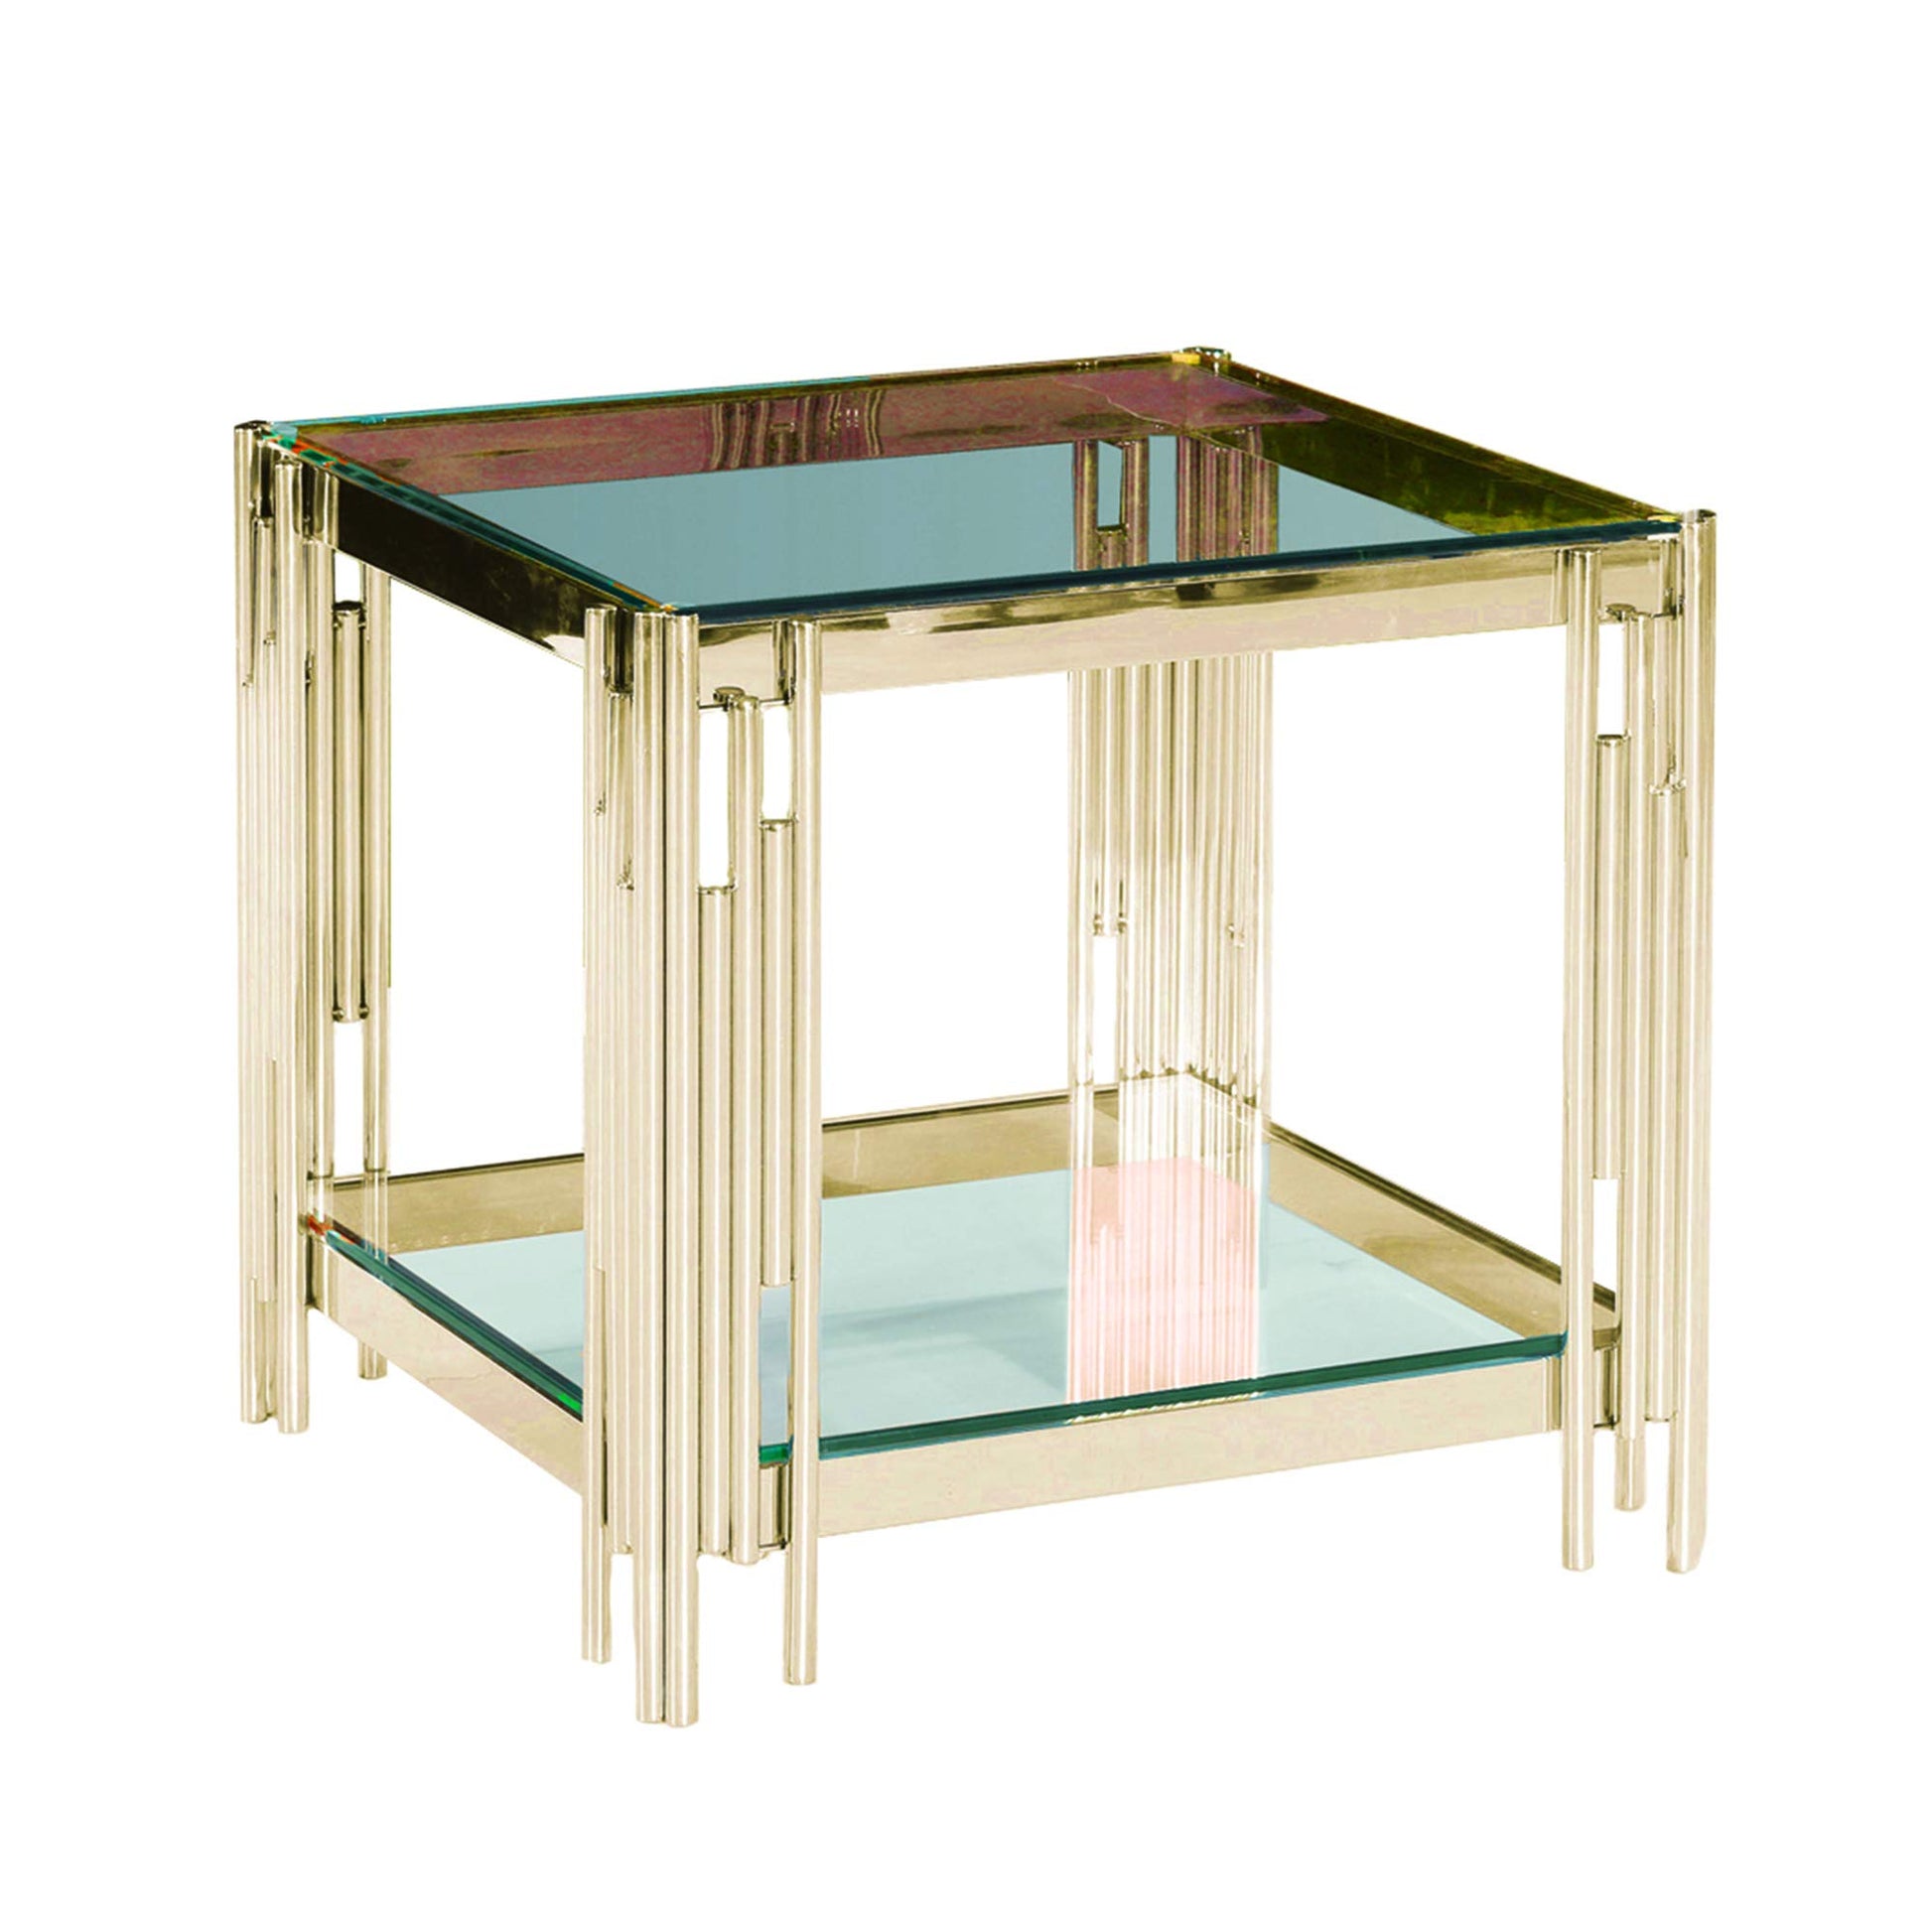 STAINLESS STEEL & GLASS SIDETABLE, GOLD KD (4804639391840)